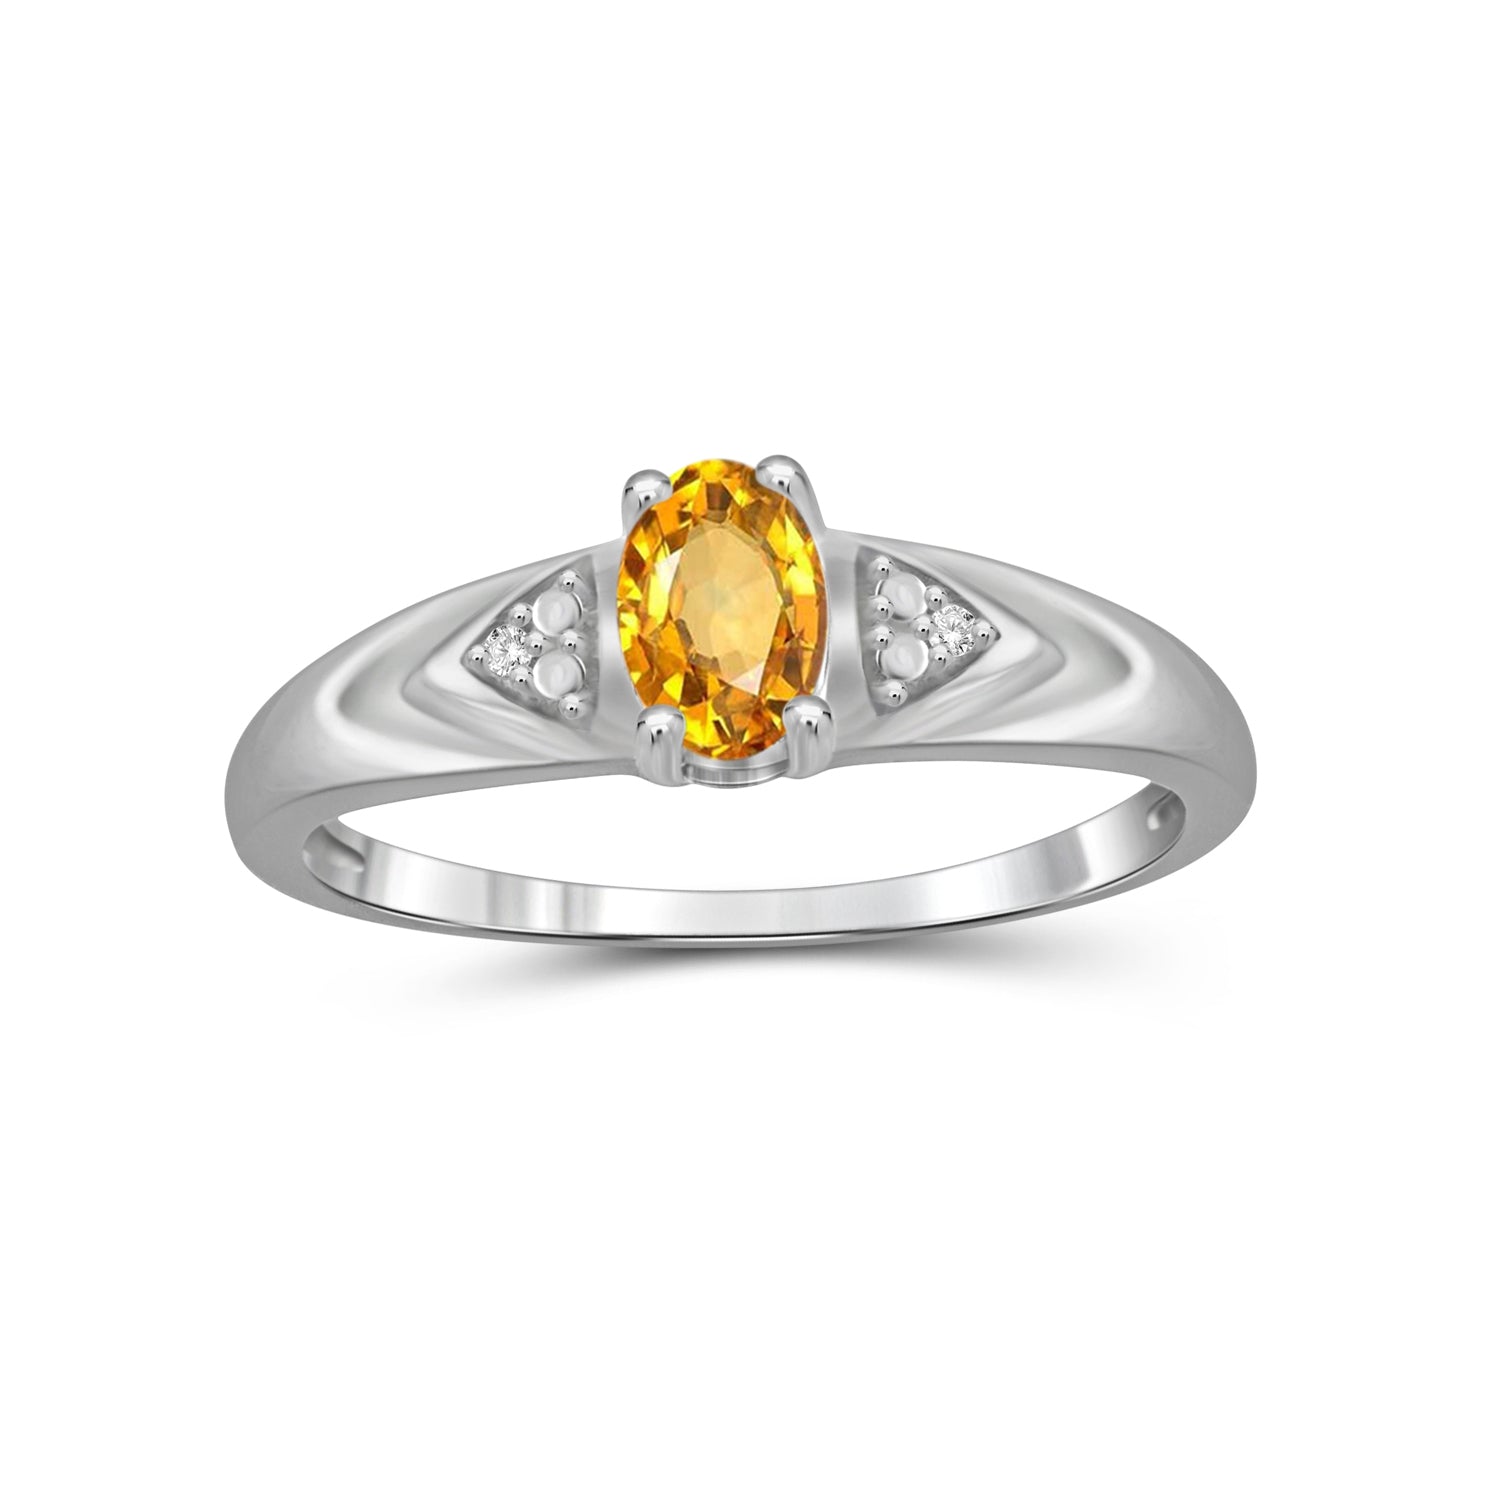 Citrine Ring Birthstone Jewelry – 0.50 Carat Citrine 0.925 Sterling Silver Ring Jewelry with White Diamond Accent – Gemstone Rings with Hypoallergenic 0.925 Sterling Silver Band